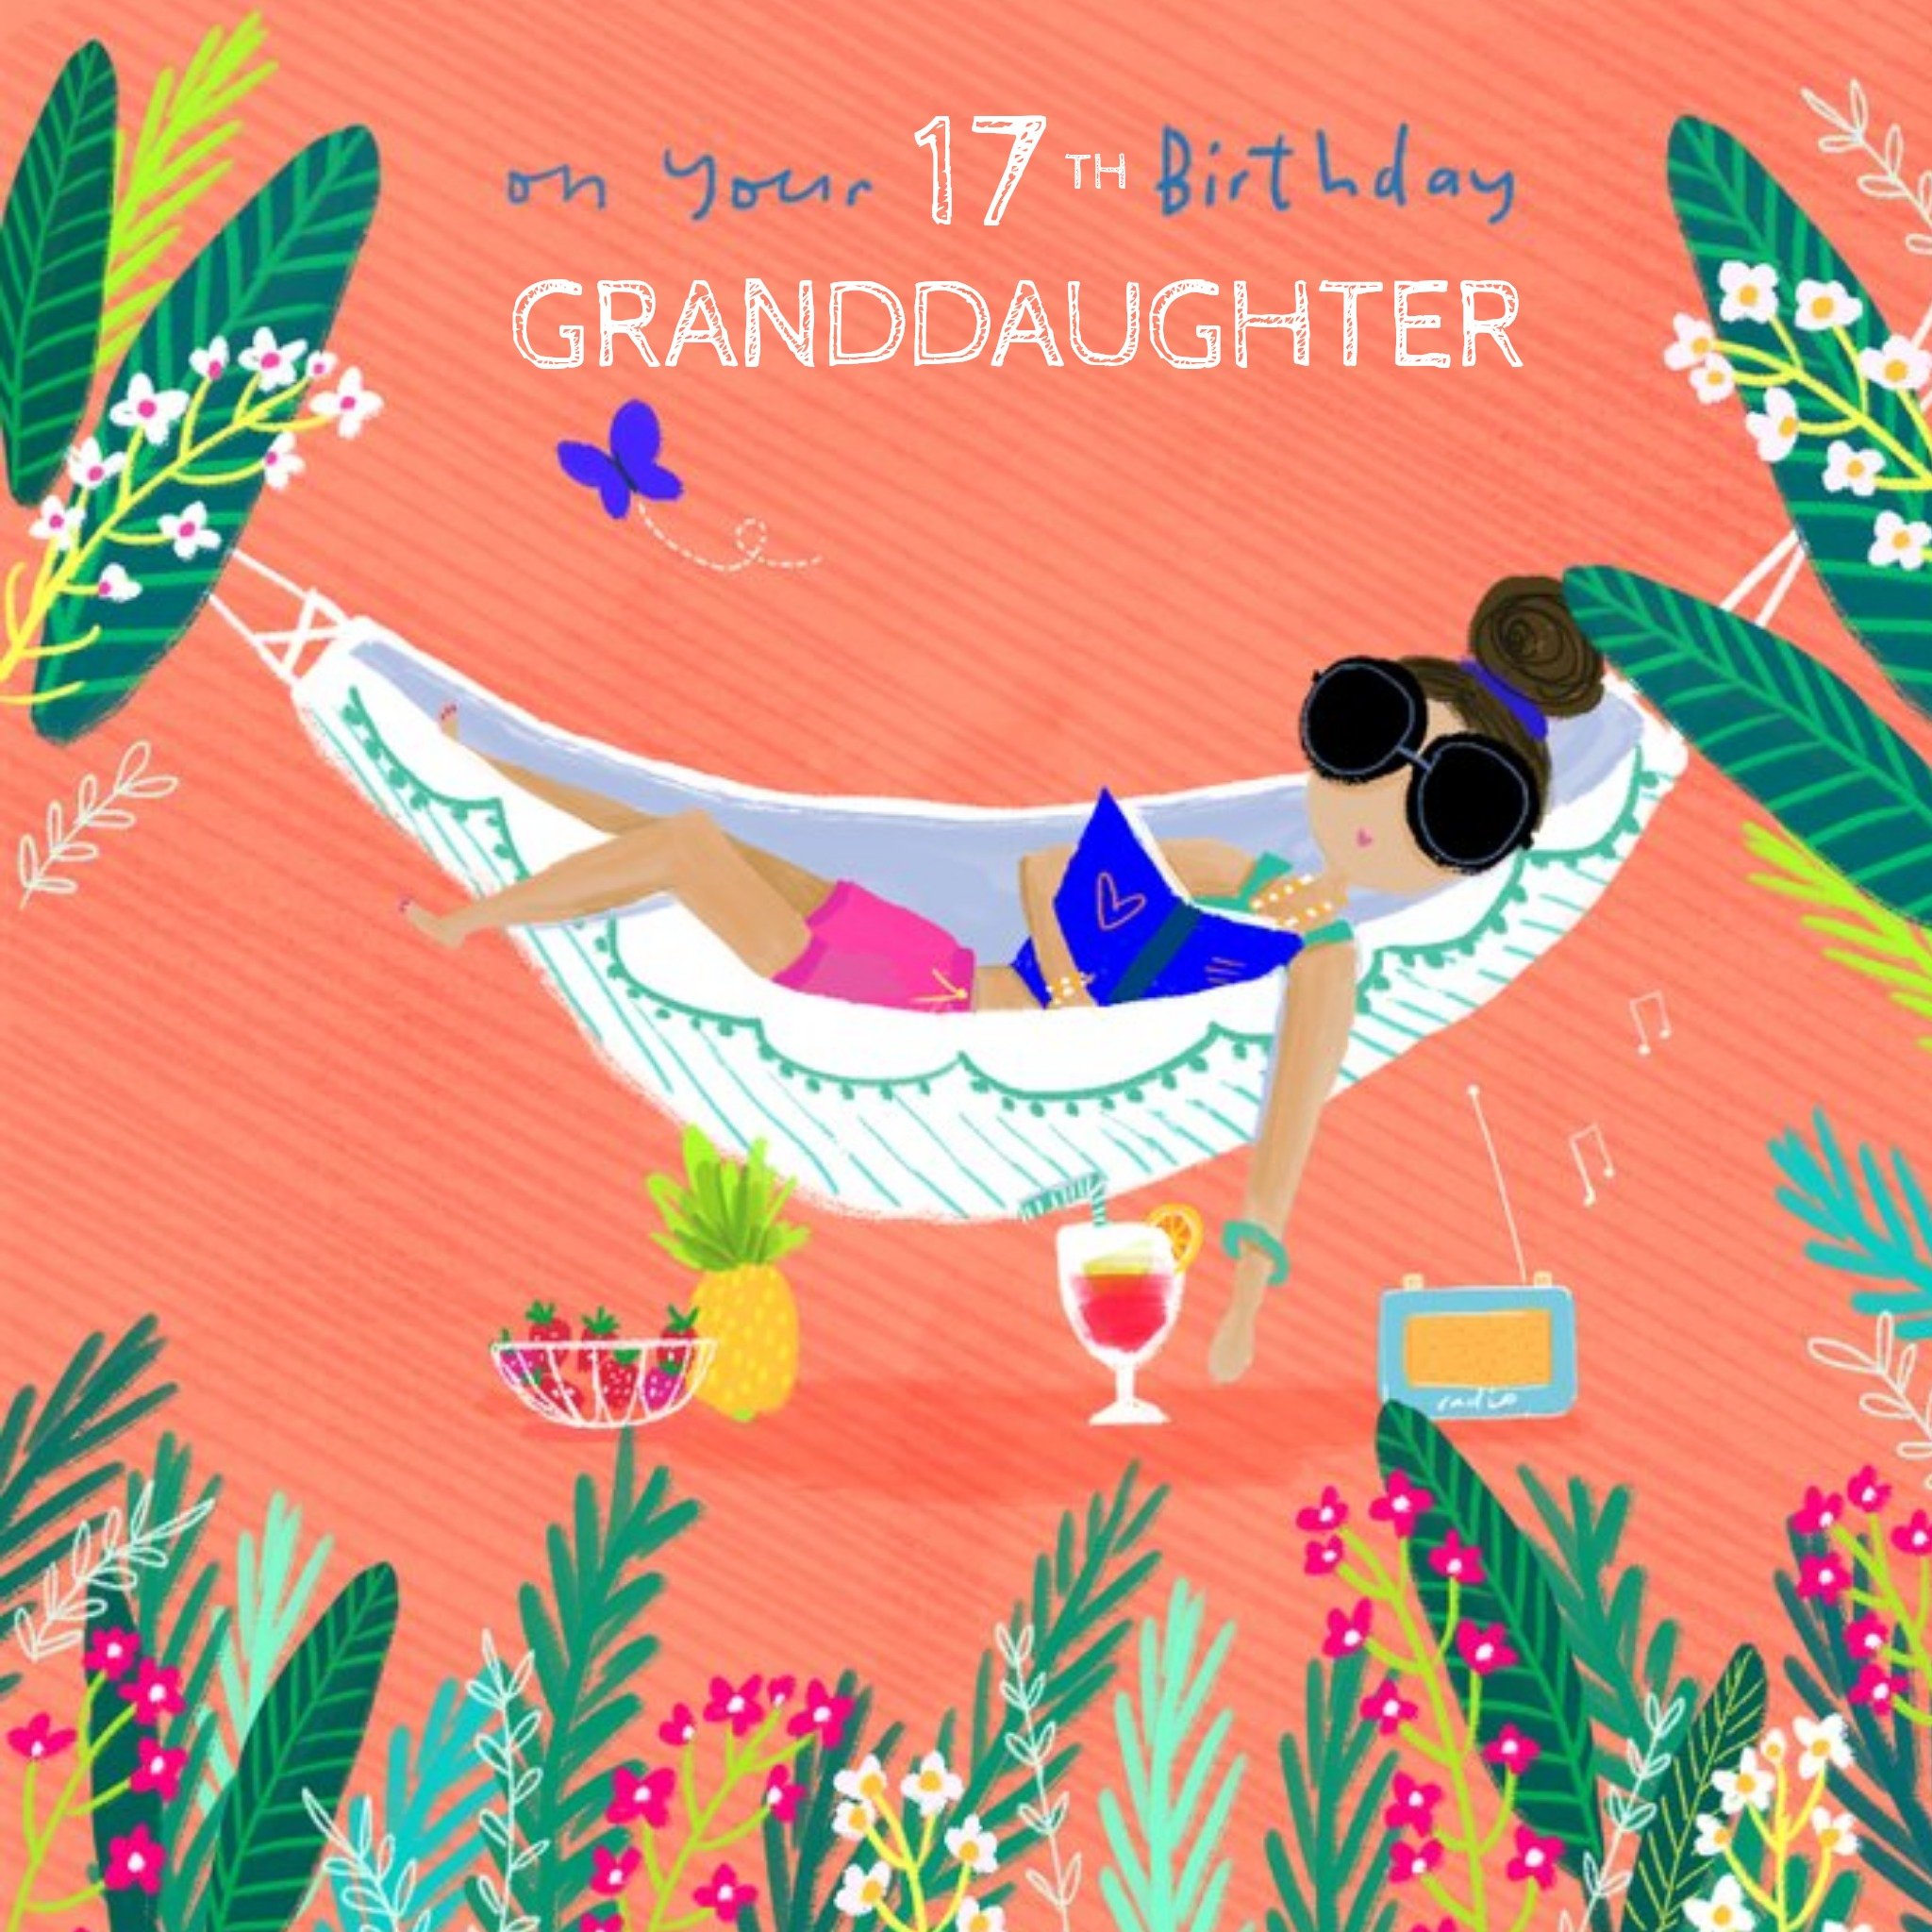 Moonpig On Your Birthday Granddaughter Illustrated Girl In Hammock Card, Square